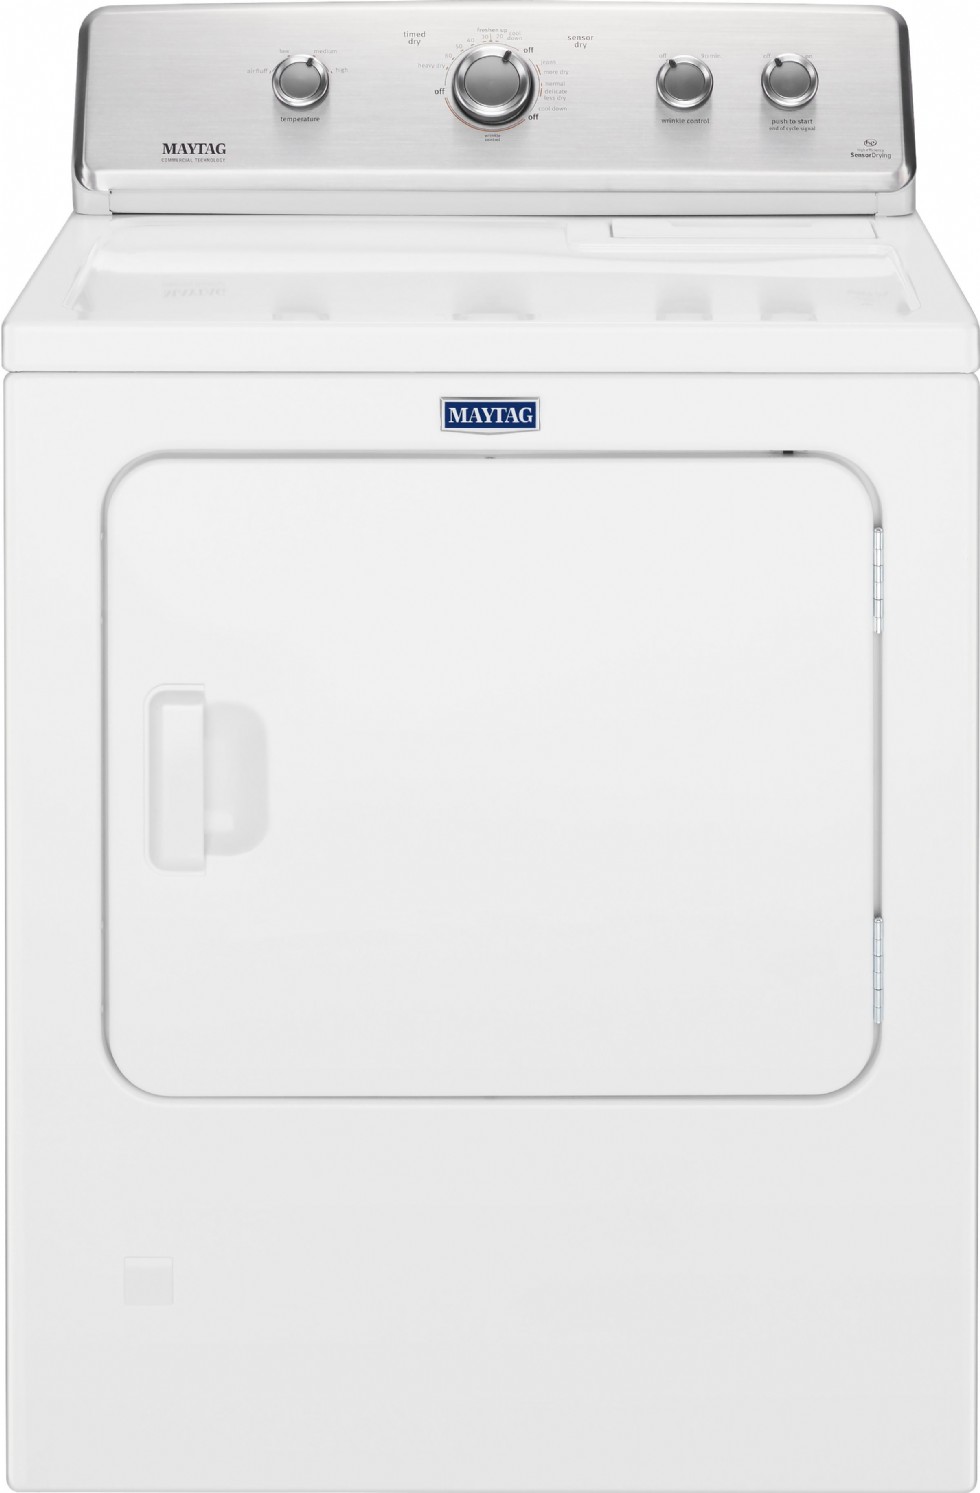 Maytag - 7 Cu. Ft. 12-Cycle Electric Dryer - White